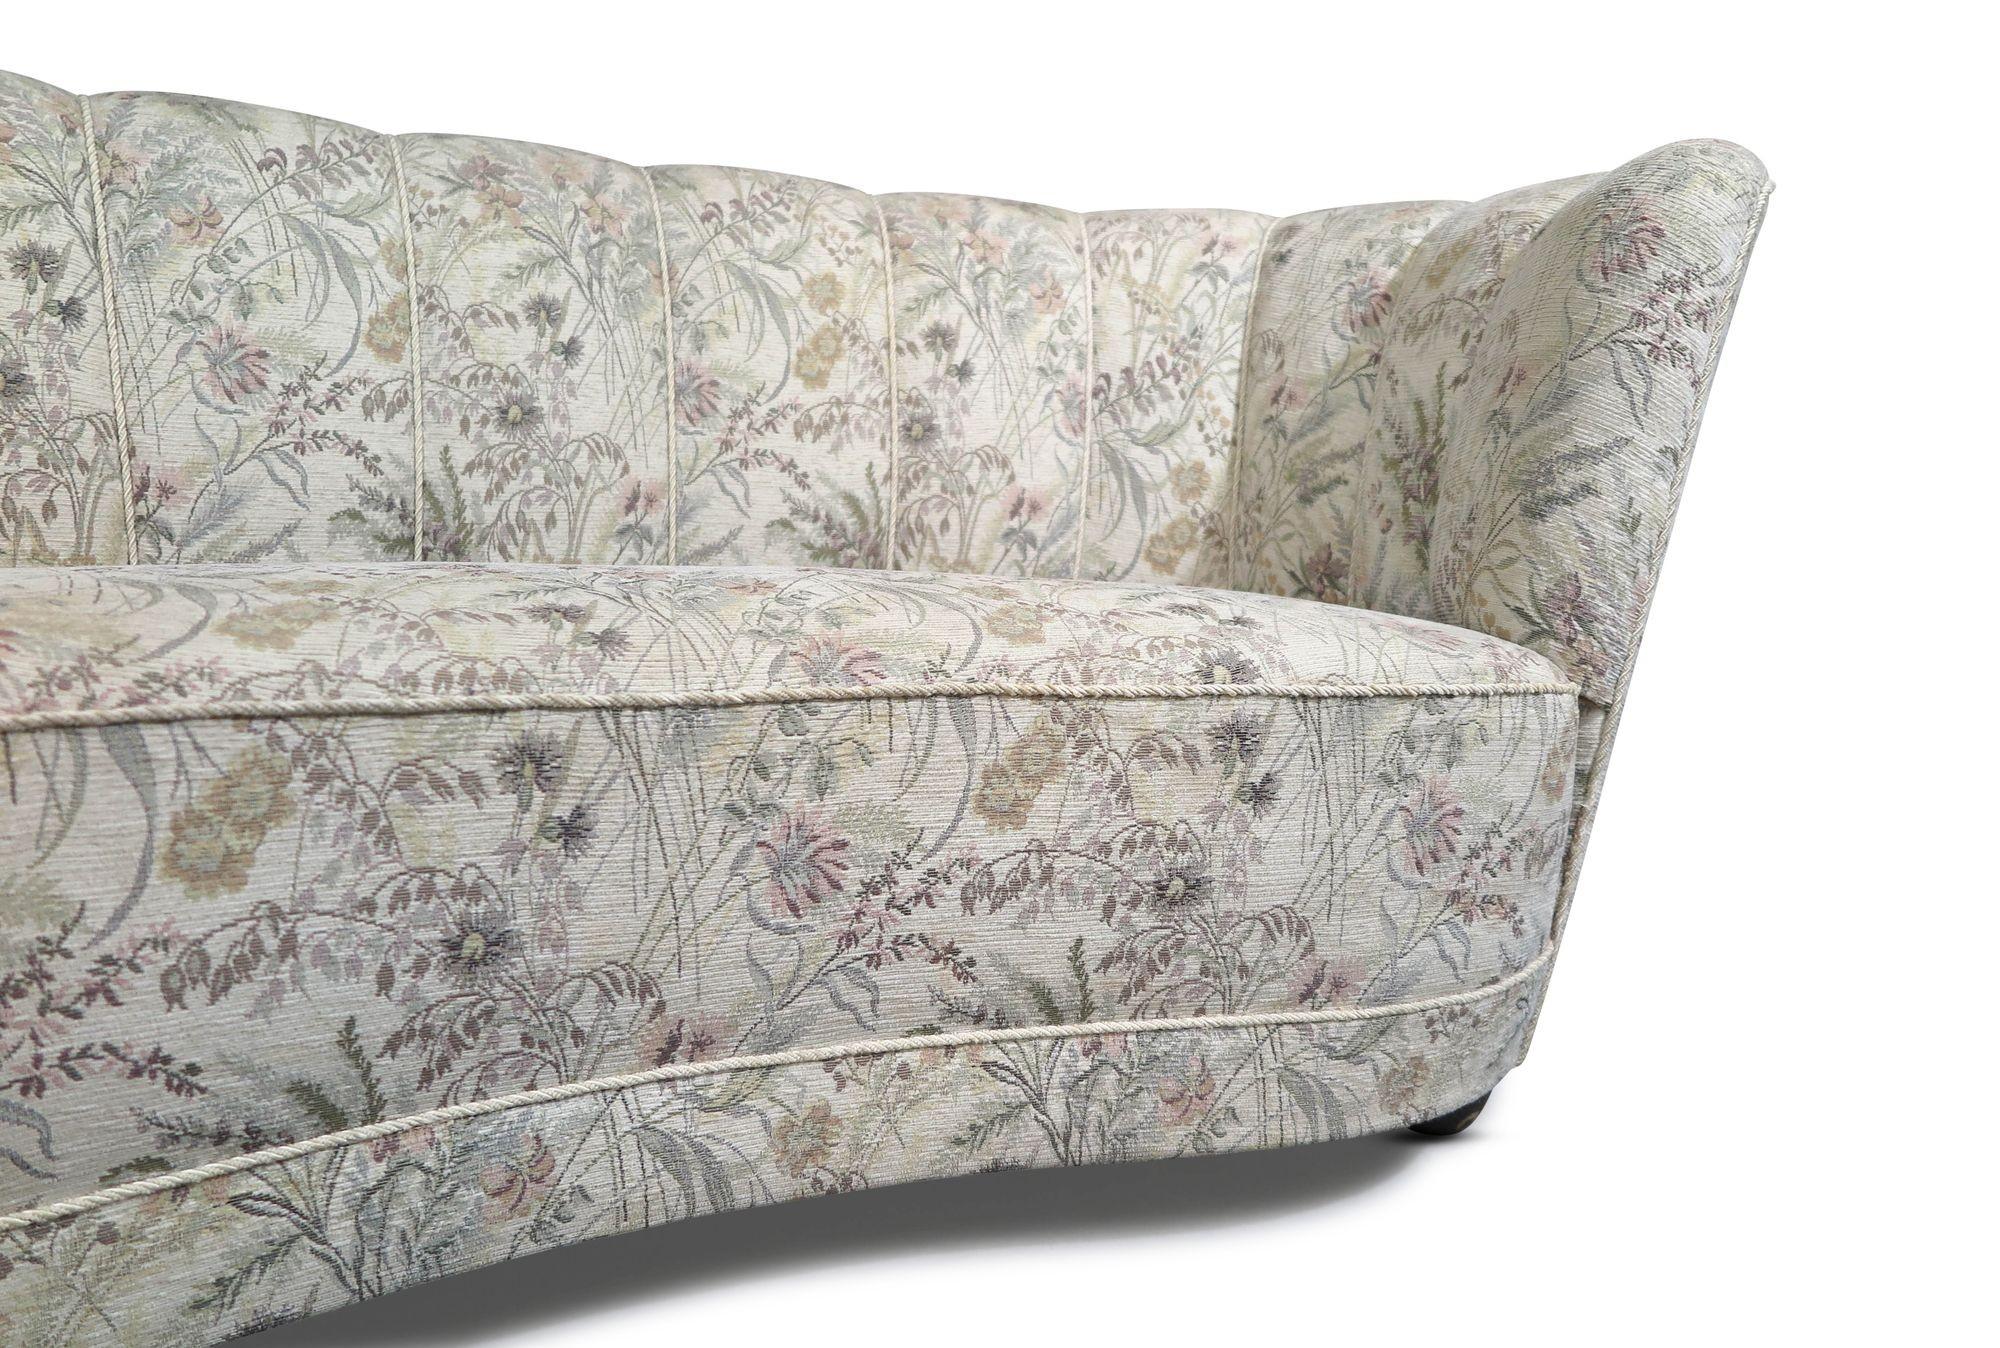 1930s Danish channel back settee crafted of a solid wood frame with eight-way hand-tied springs, horsehair and cotton padding, this masterfully crafted curved-back settee is covered in the original 1930's floral pattern. In good vintage condition,